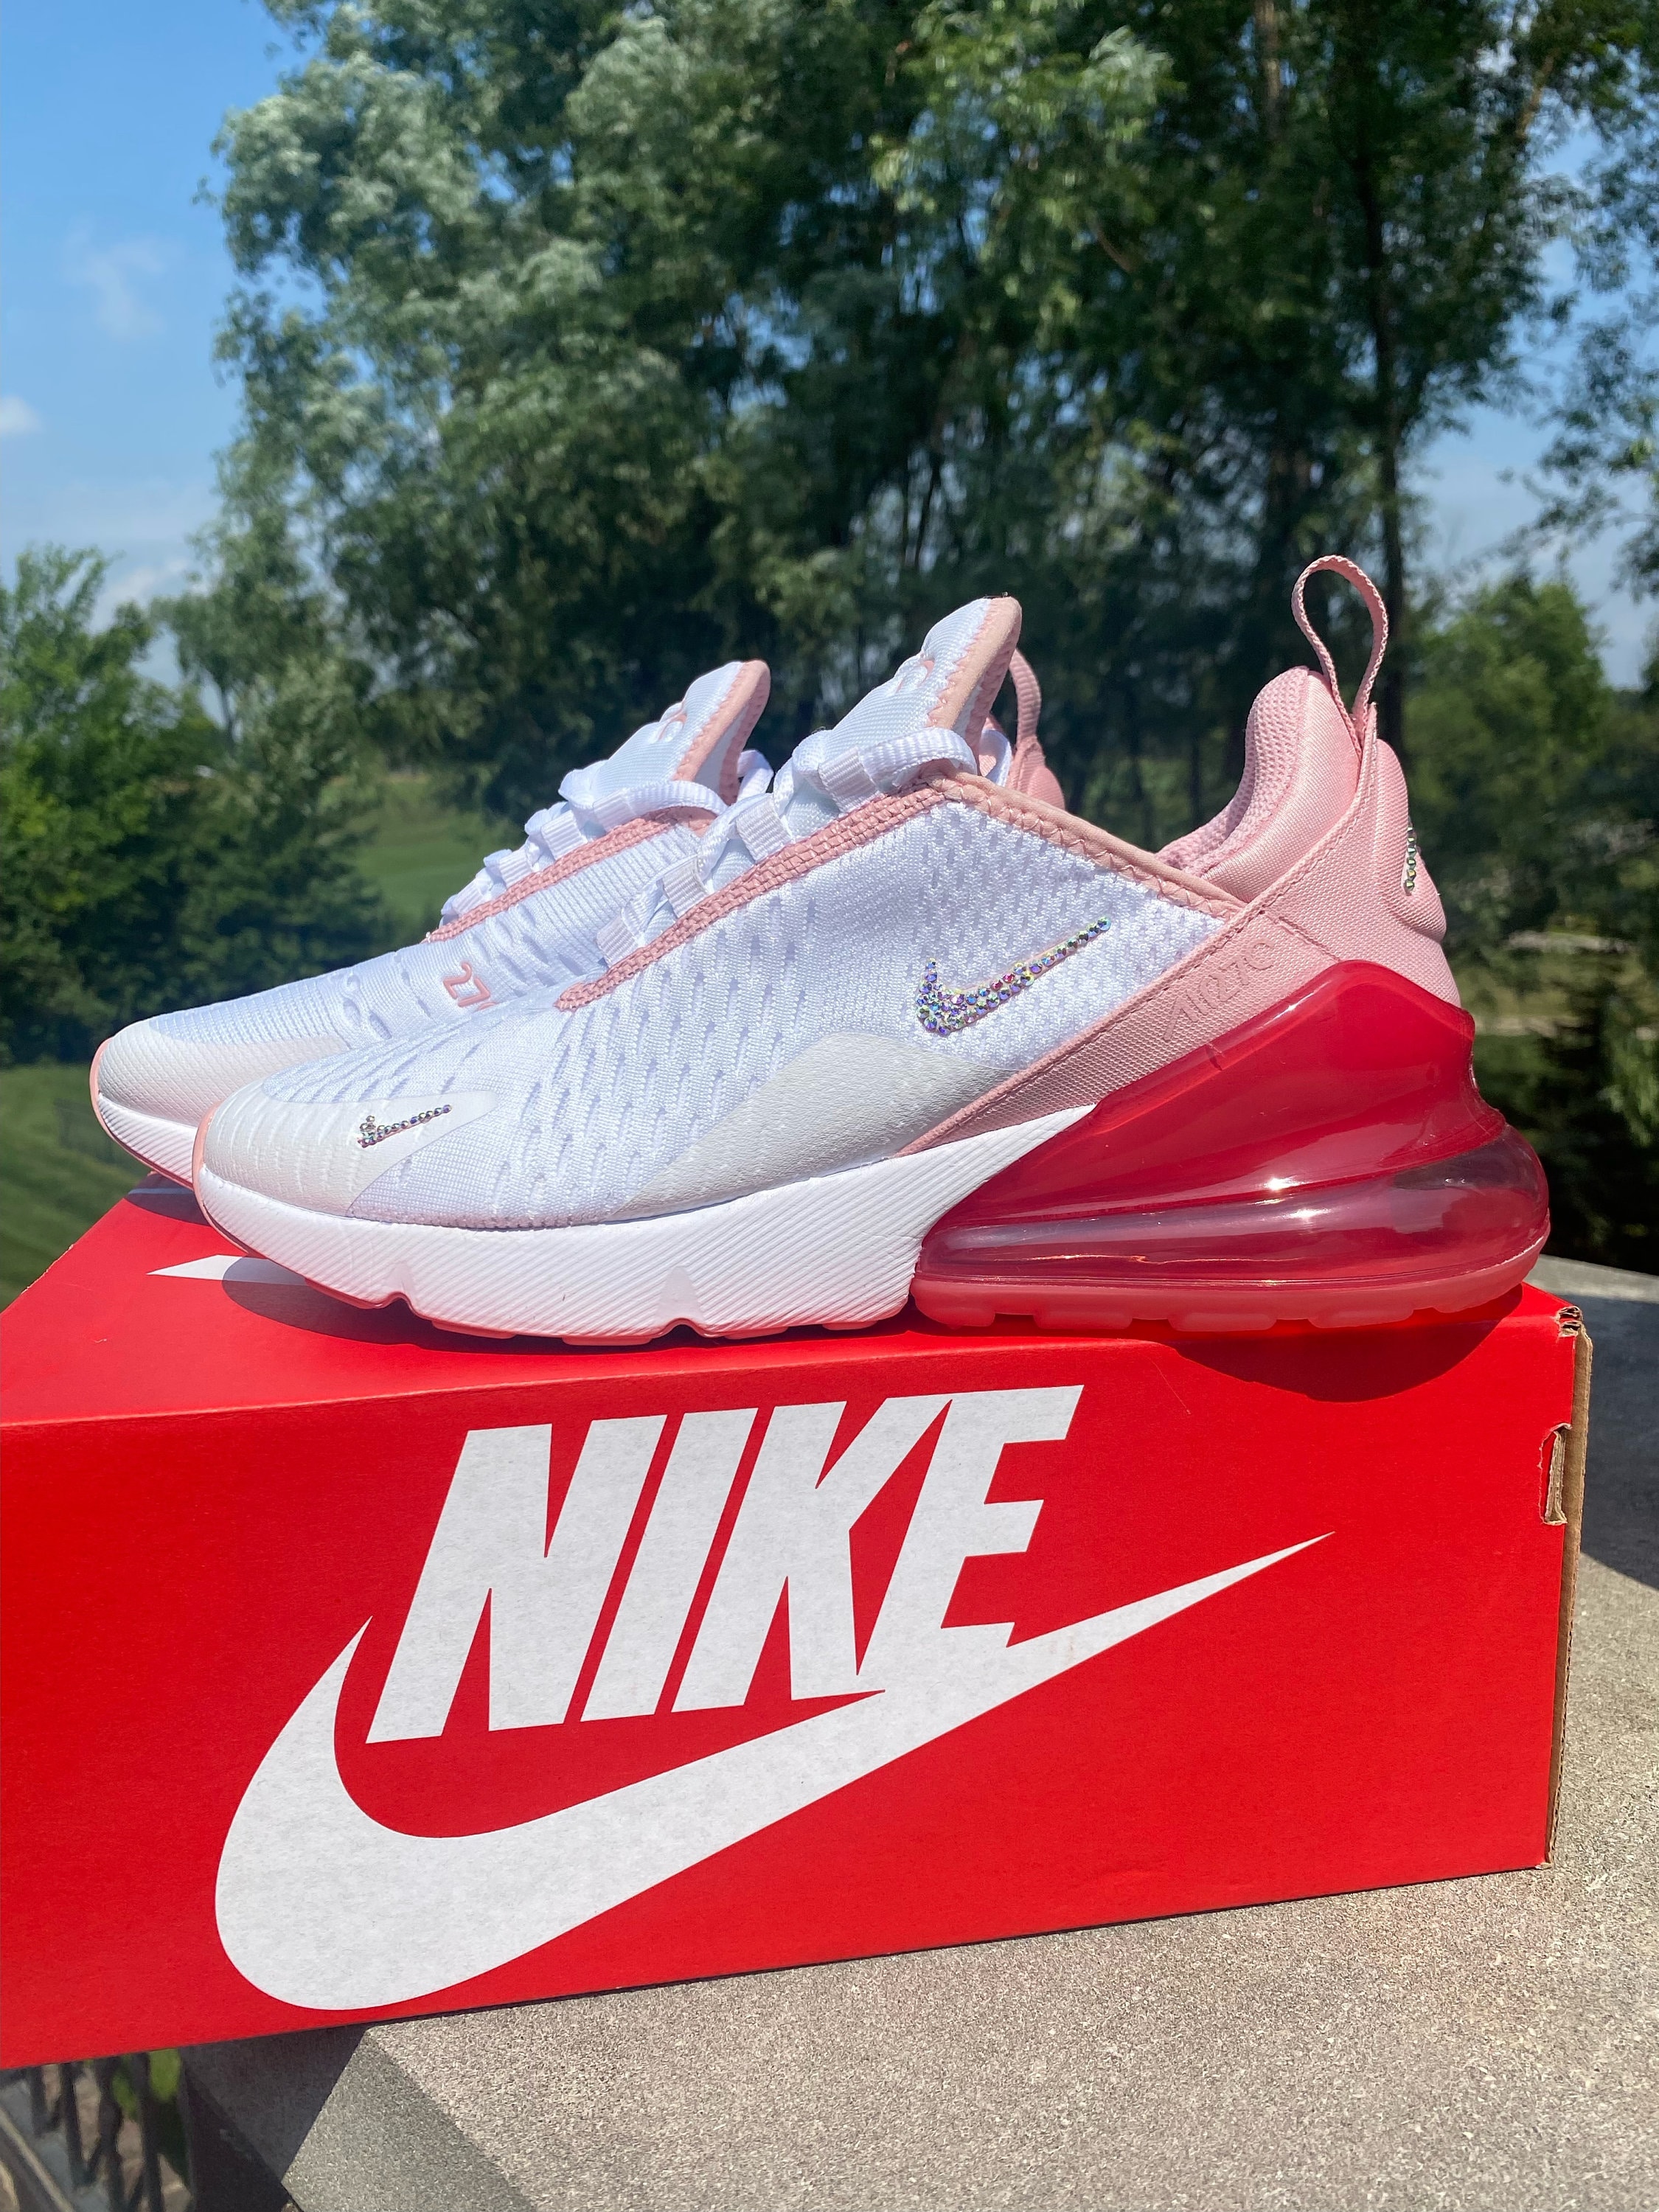 Peuter Krijger Maakte zich klaar Women's Nike Air Max 270 White/glaze Pink Blinged Out With - Etsy